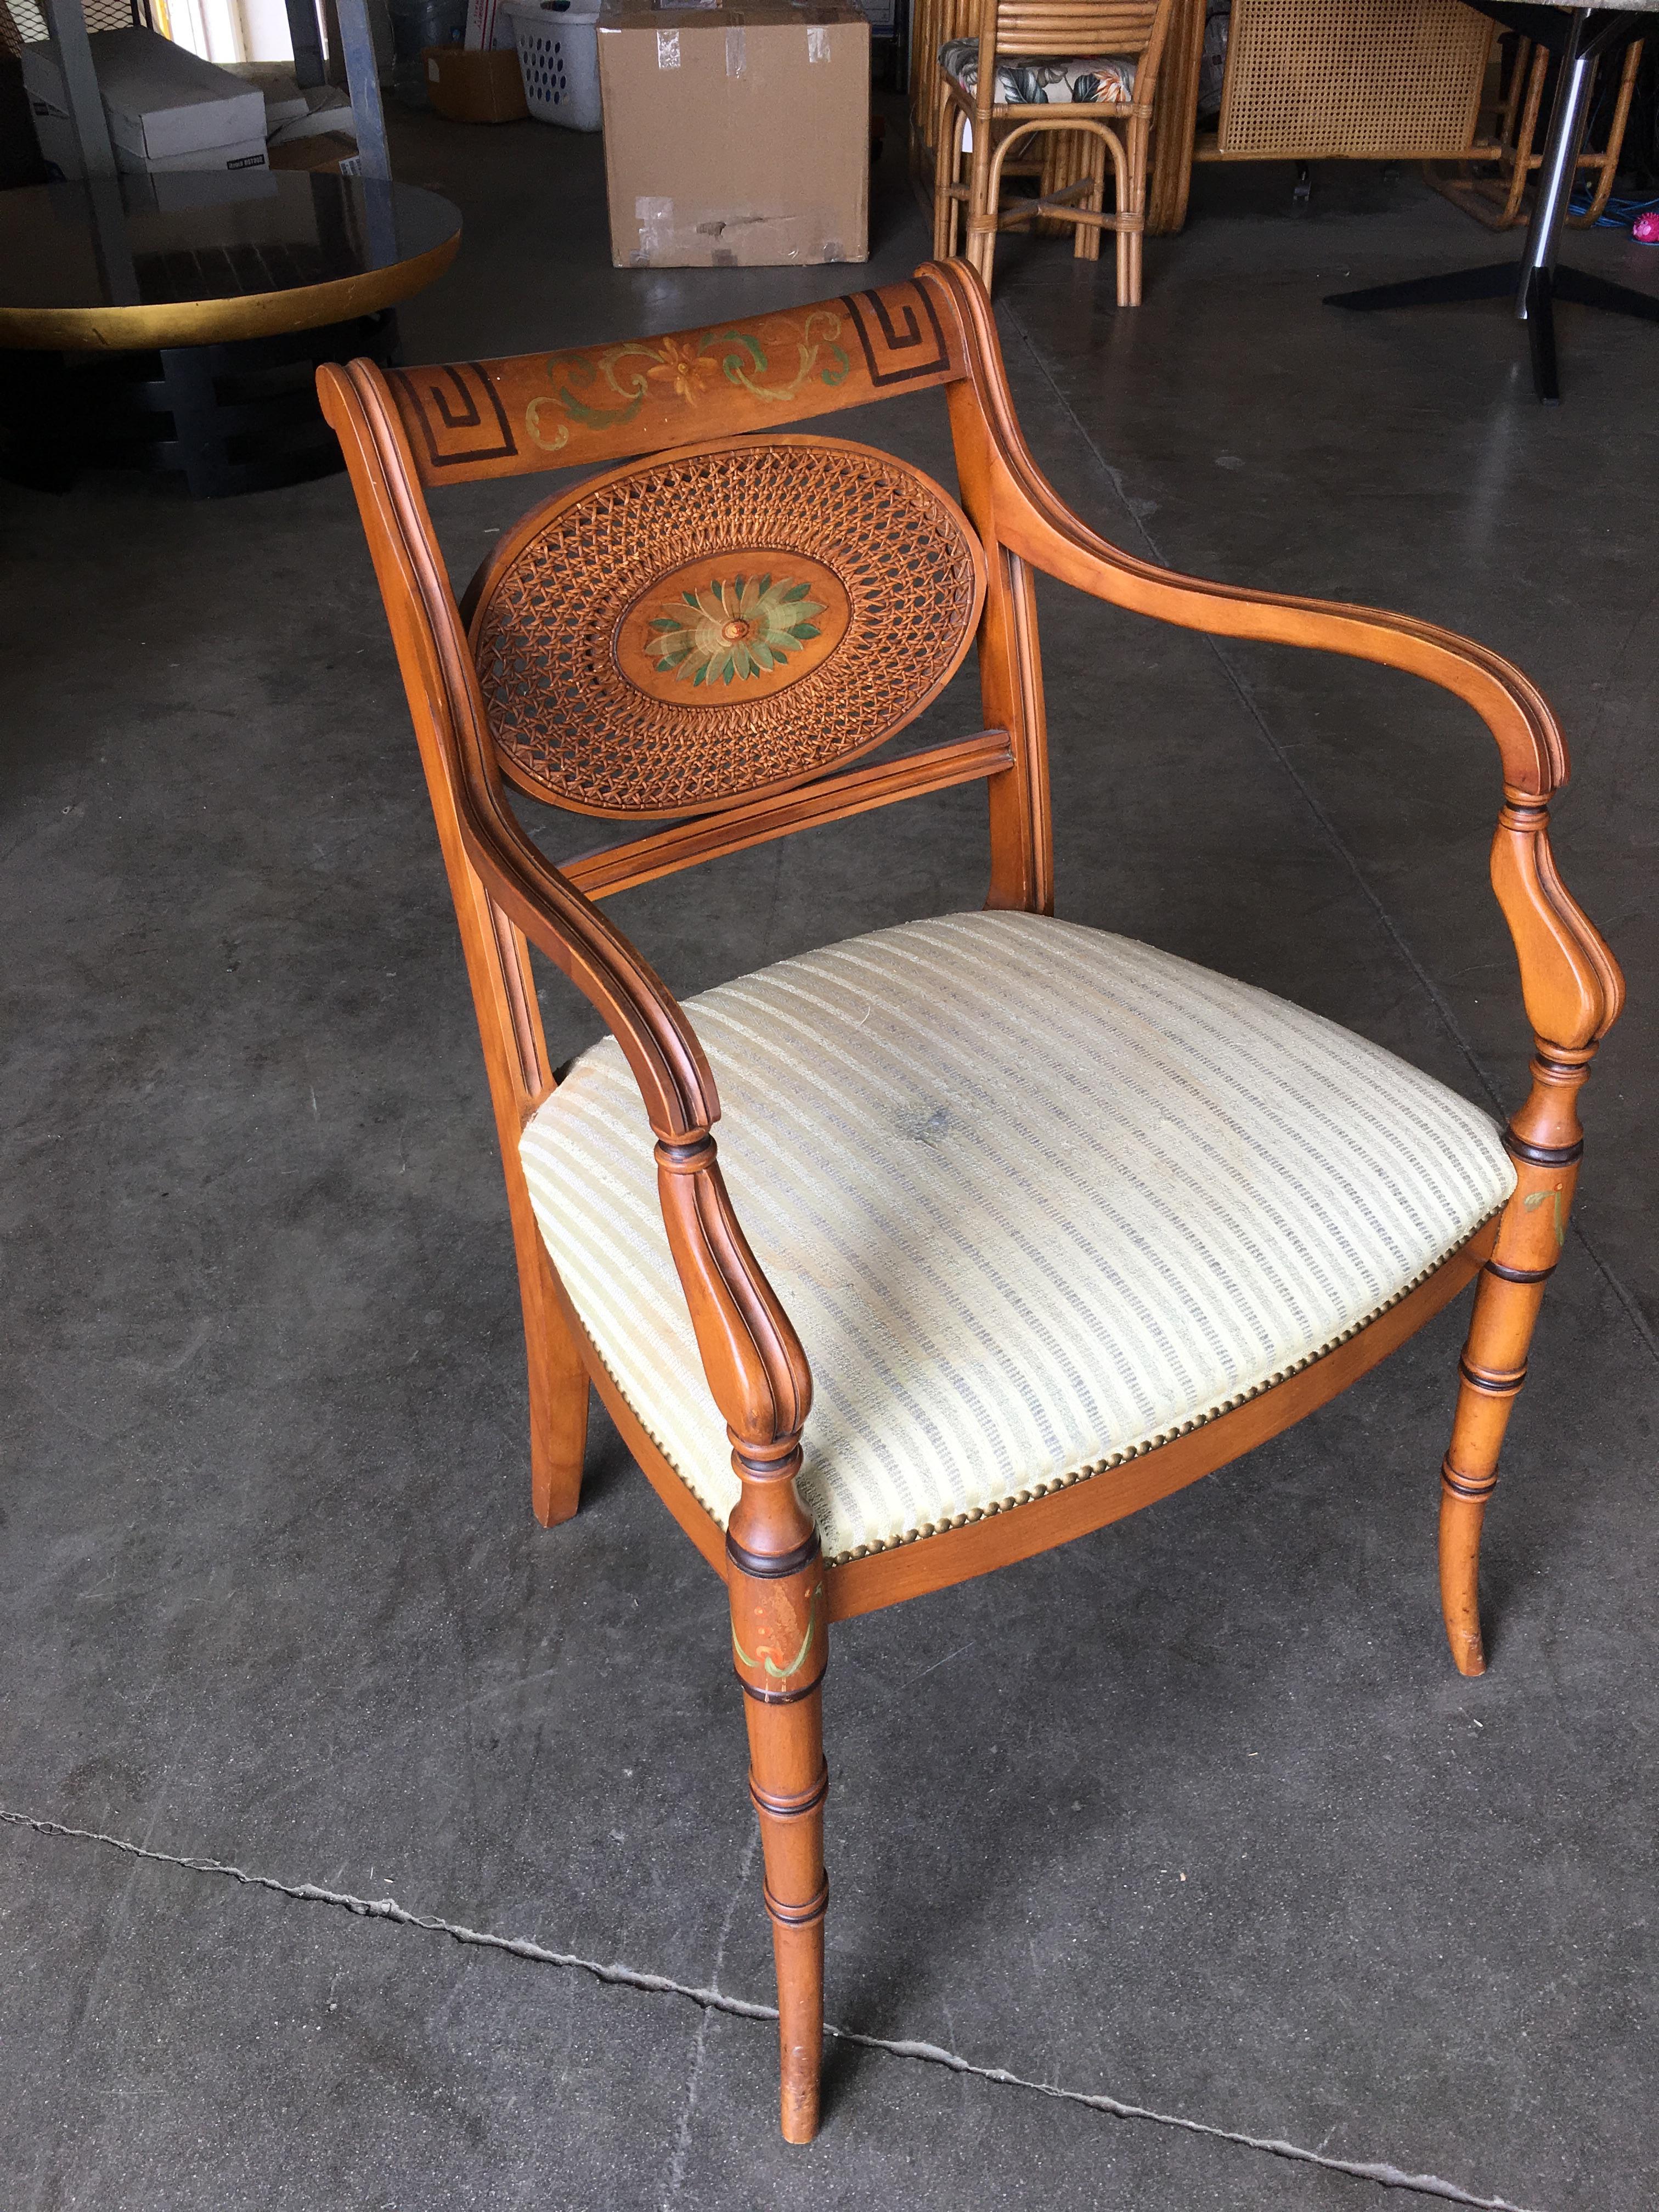 Neoclassical French Neoclassic Dining Chair with Hand-Painted Woven Wicker Back